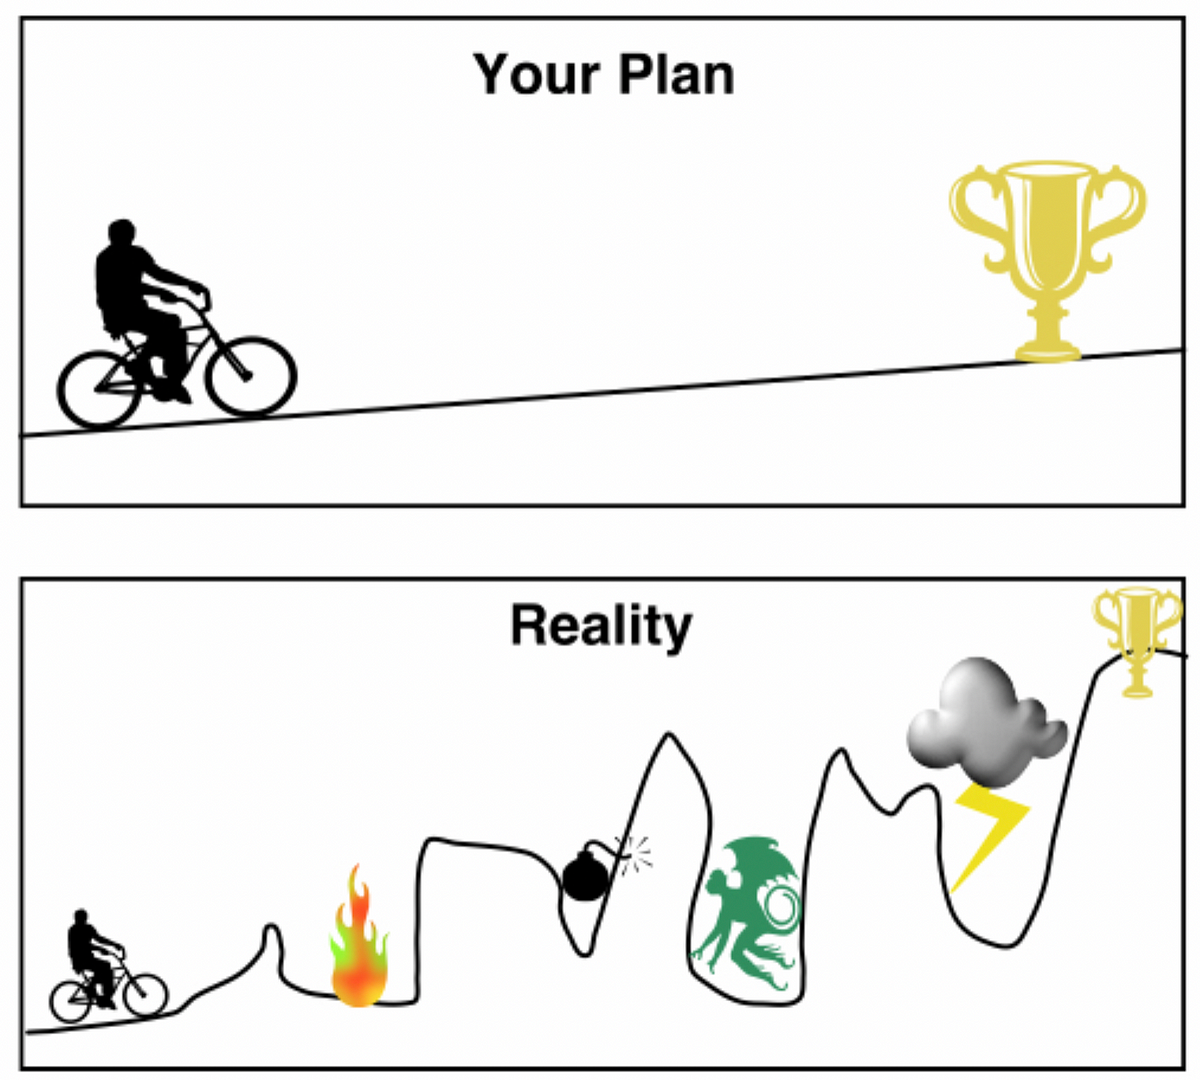 How the Planning Fallacy Trips You Up | by Bent Flyvbjerg | Geek ...